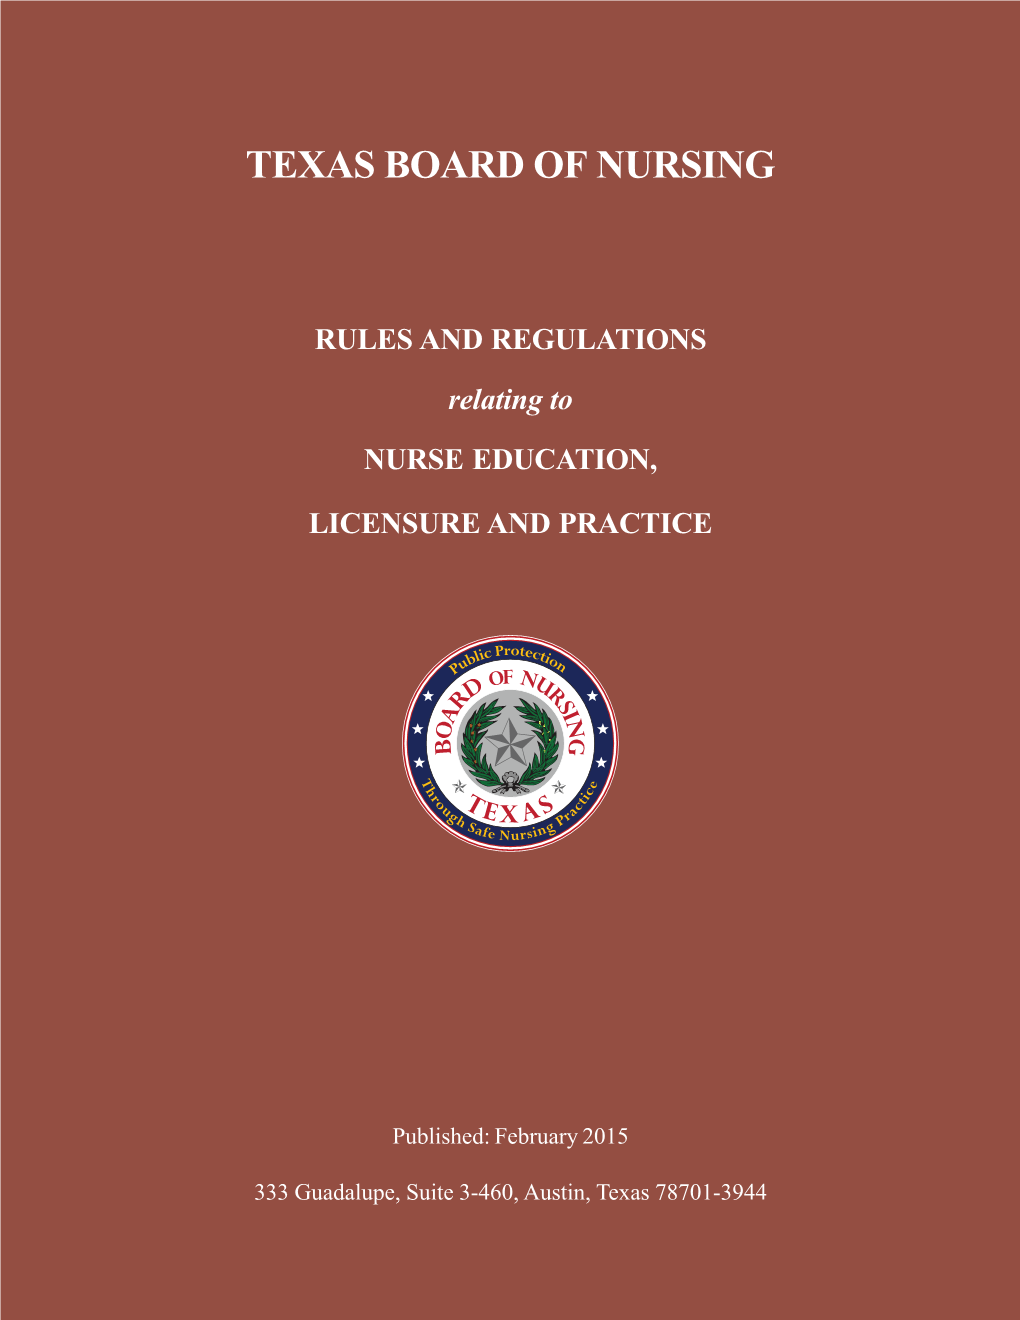 Texas Board of Nursing Rules and Regulations